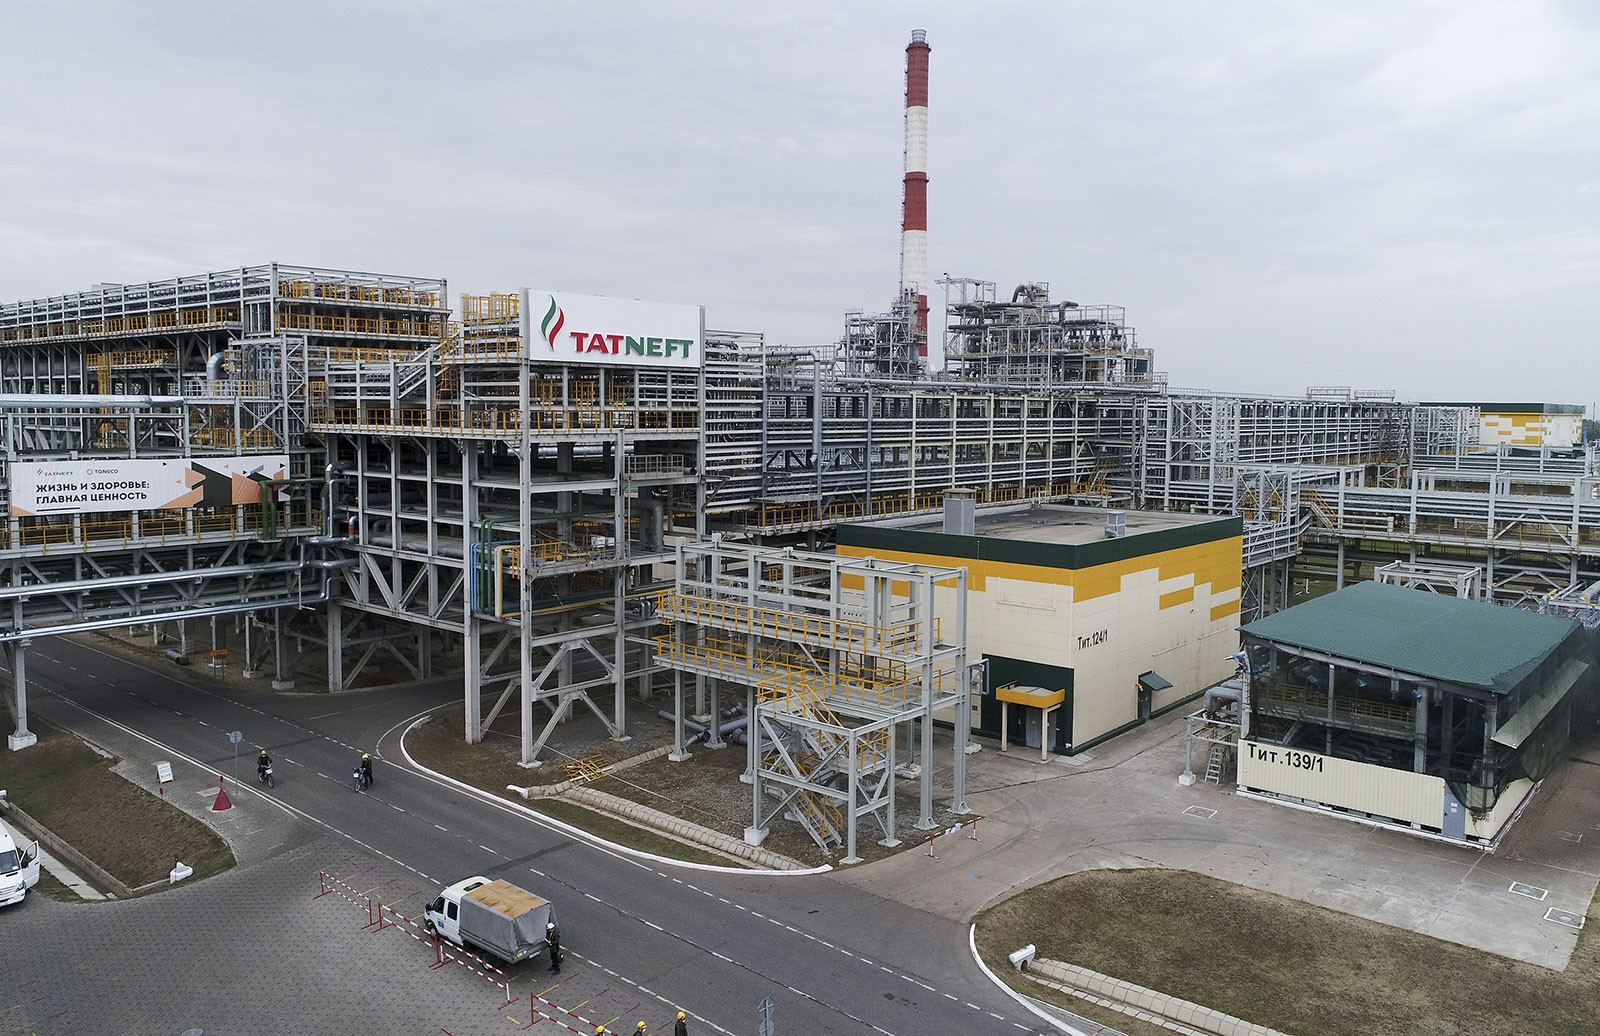 Tatneft's oil refining and petrochemical complex in Tatarstan, Russia.